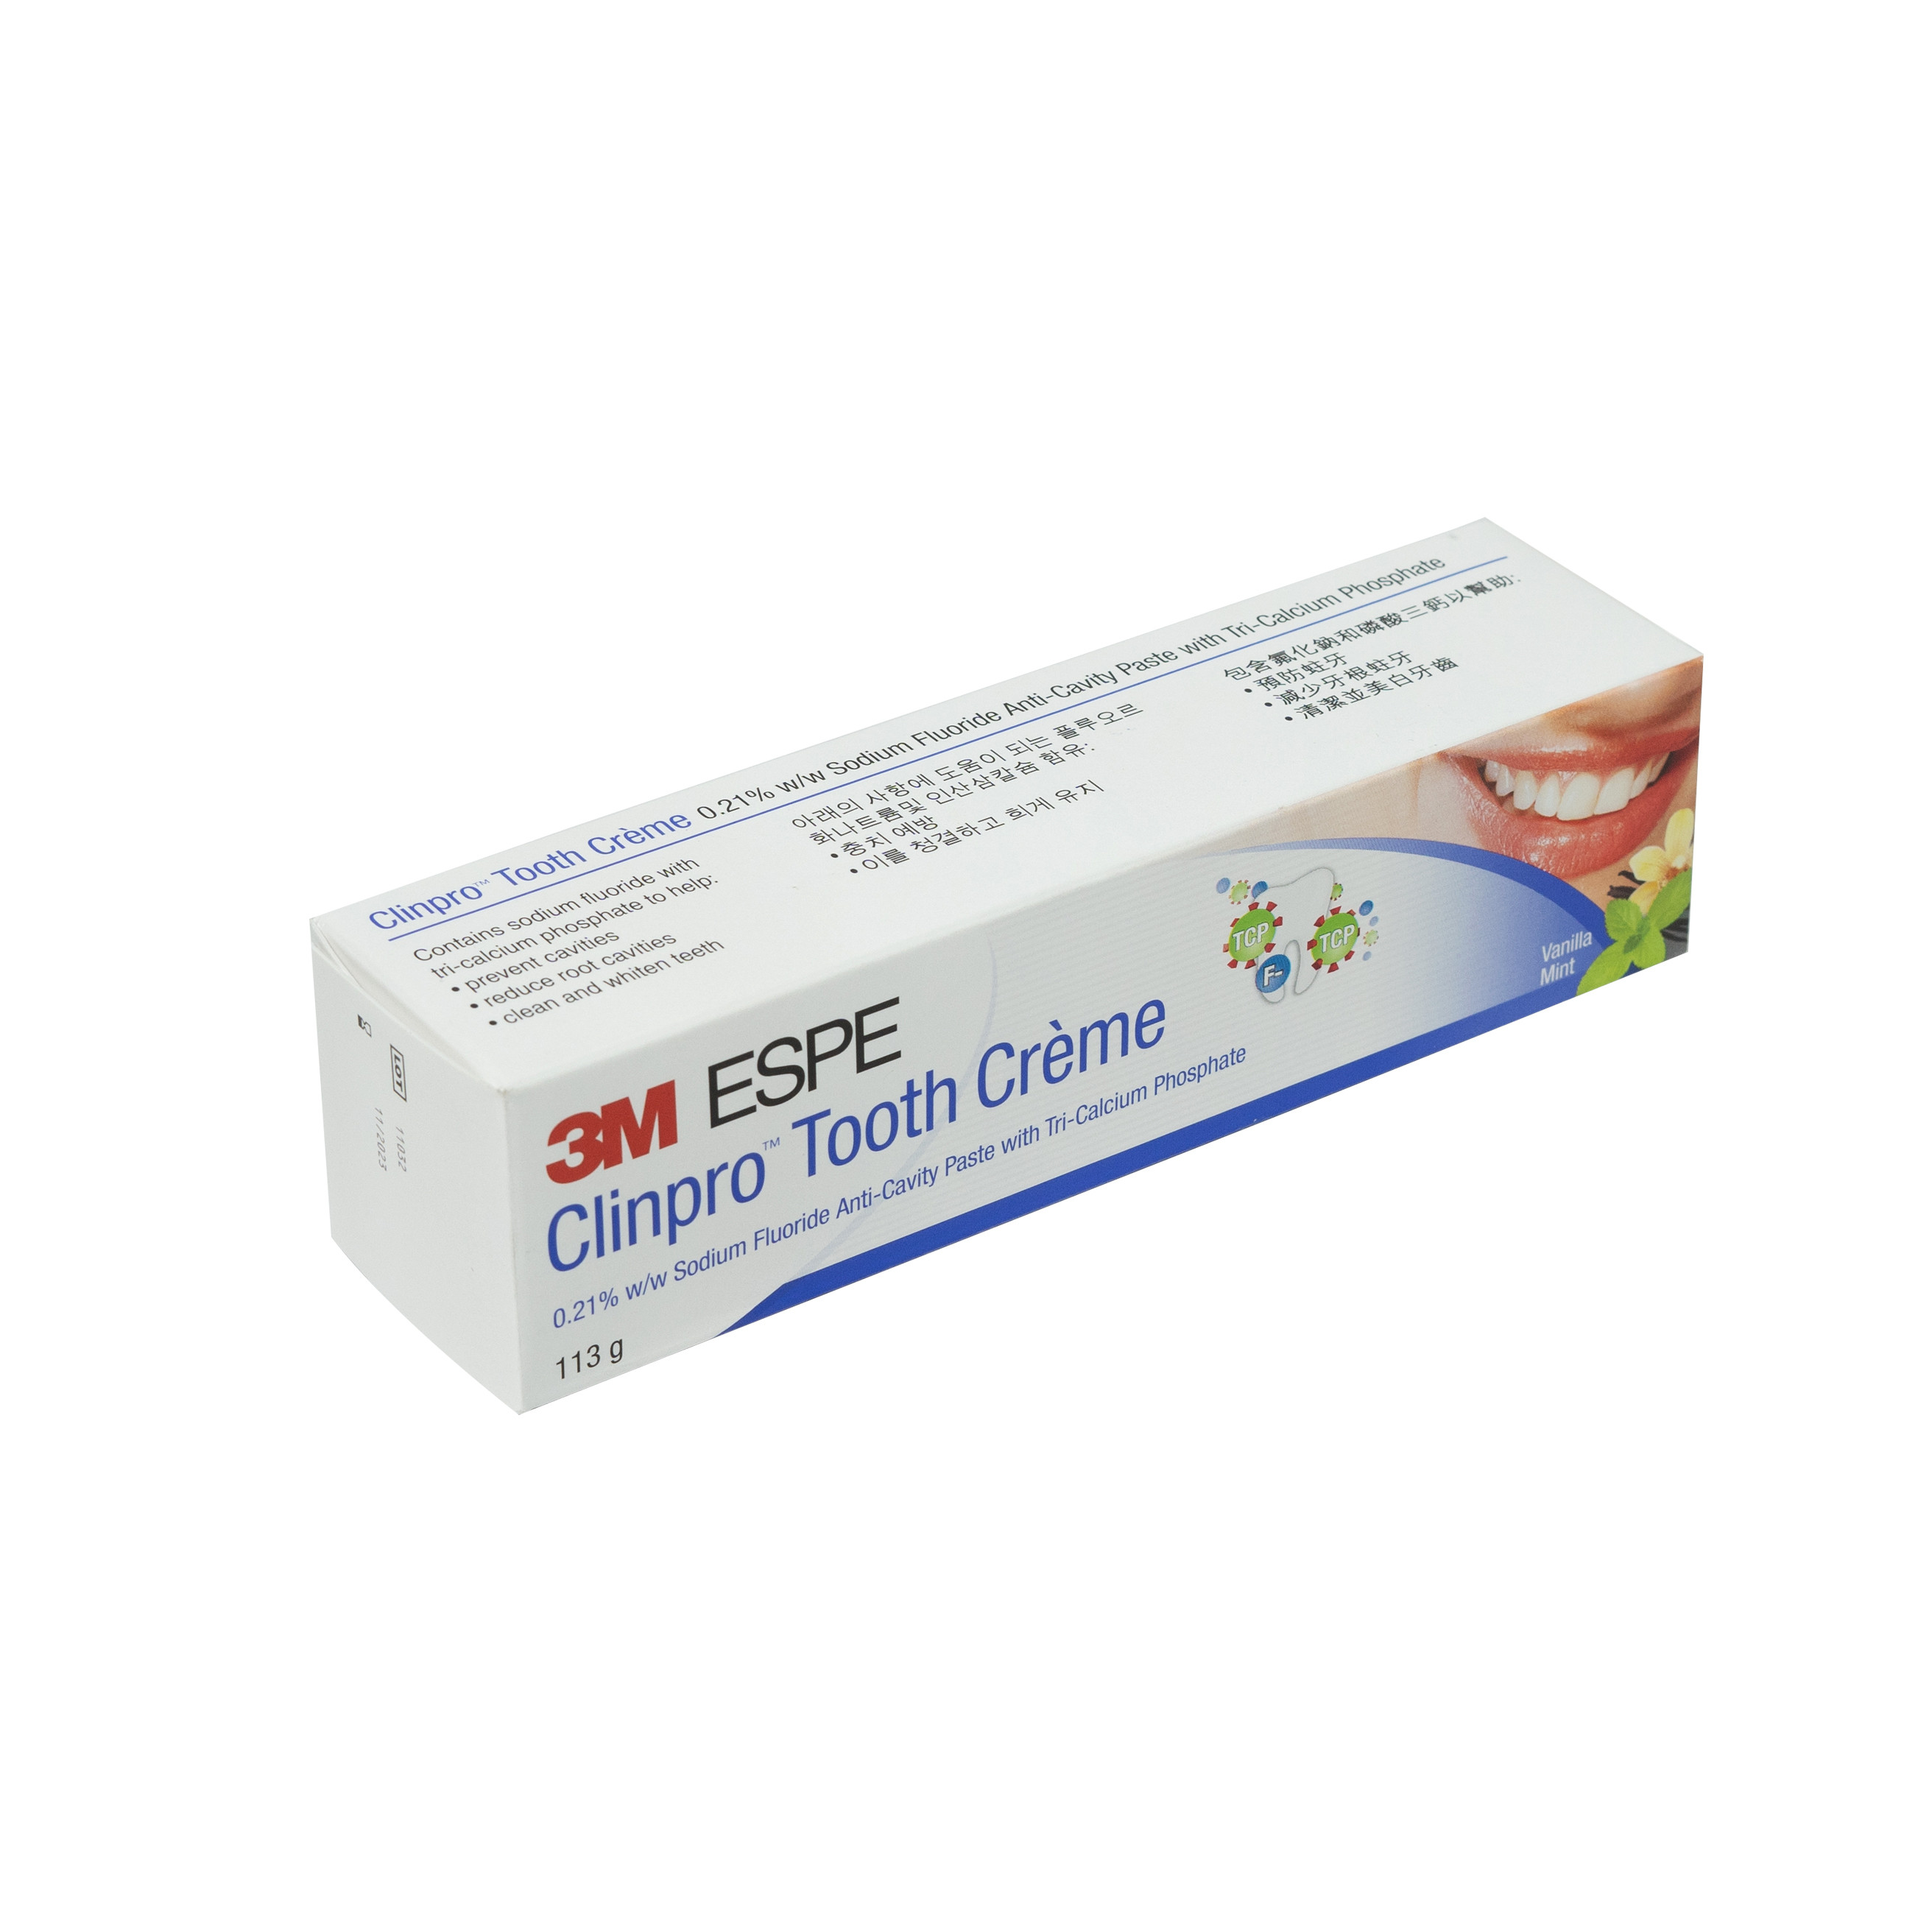 3M ESPE Clinpro Tooth Creme Anticavity Toothpaste 113gm